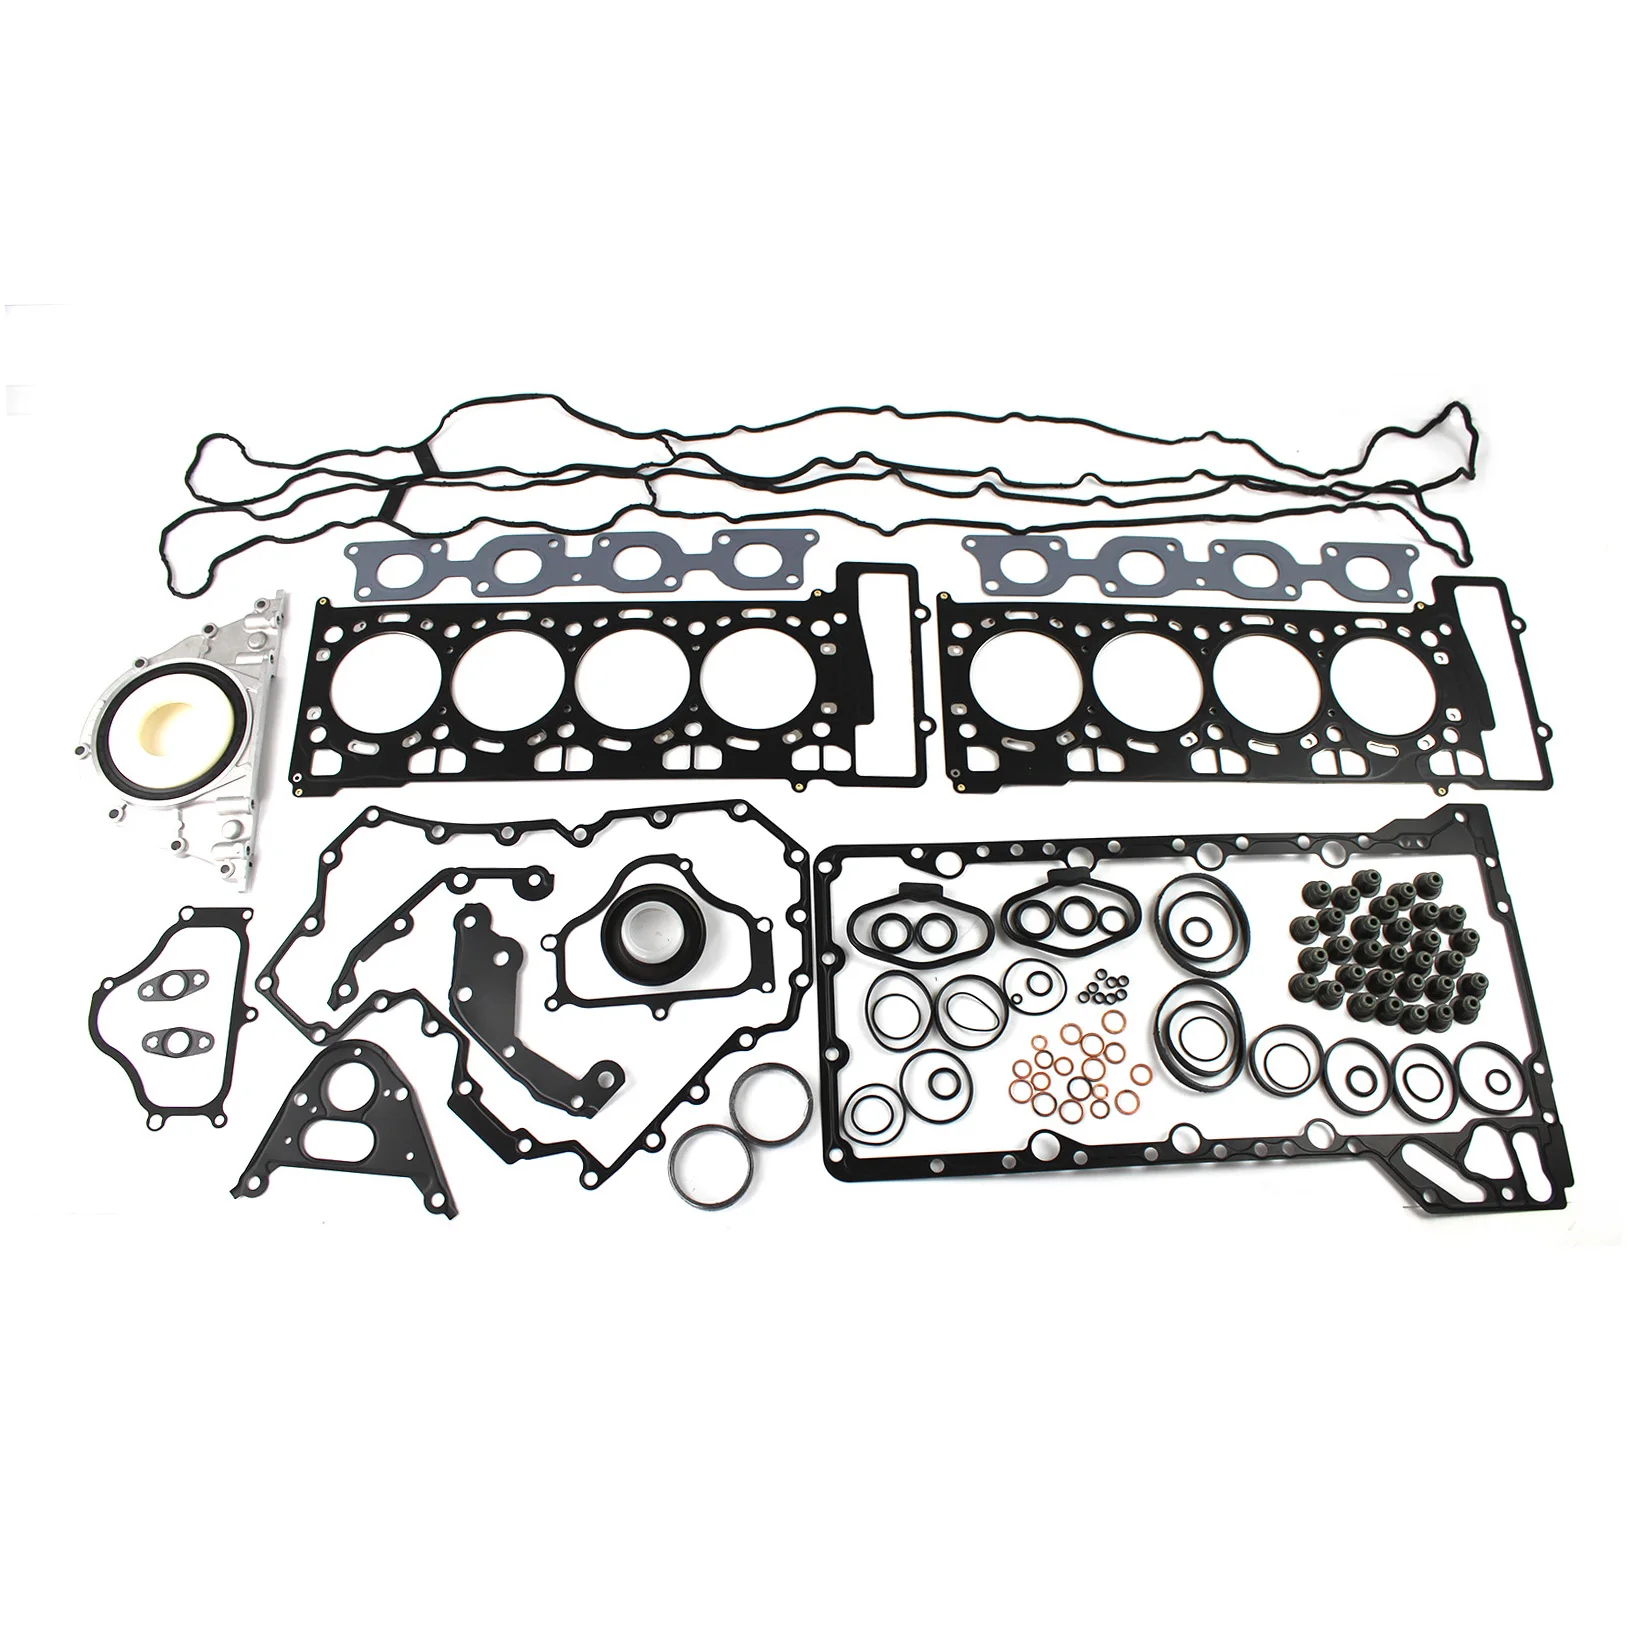 New N63 4.4T Engine Overhaul Gasket Set For BMW 550i 750Li X5 X6 F10 F02 F07 E70 E71 Aftermarket Parts with 12 Month Warranty zoomkey high quality engine parts full overhaul gasket kit set for land rover aj133 5 0l 508pn oe lr026149 lr026146